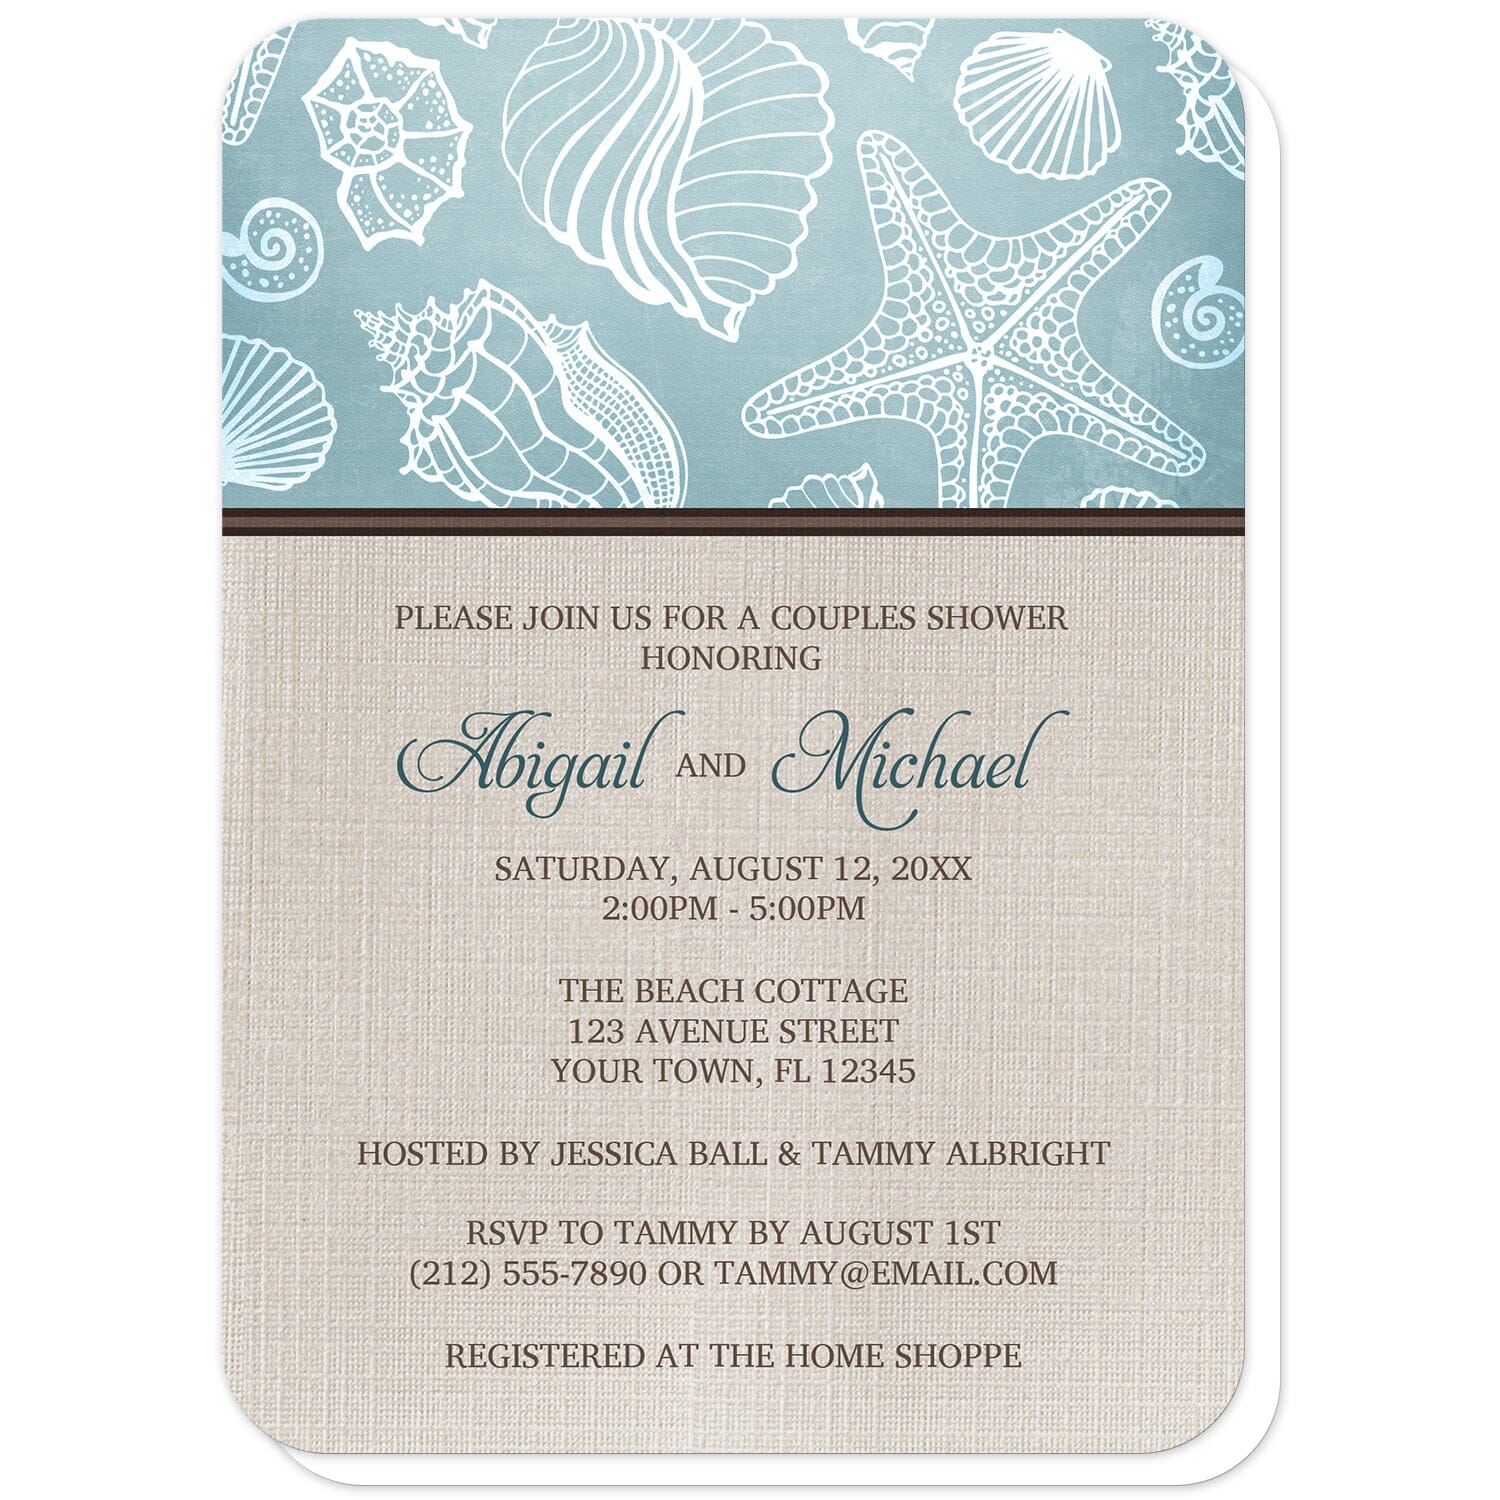 Rustic Beach Linen Seashell Couples Shower Invitations (with rounded corners) at Artistically Invited. Rustic beach linen seashell couples shower invitations with a white line seashell pattern over a beachy turquoise background along the top. Your personalized couples shower celebration details are custom printed in dark turquoise and brown over a beige canvas background design below the seashell pattern.